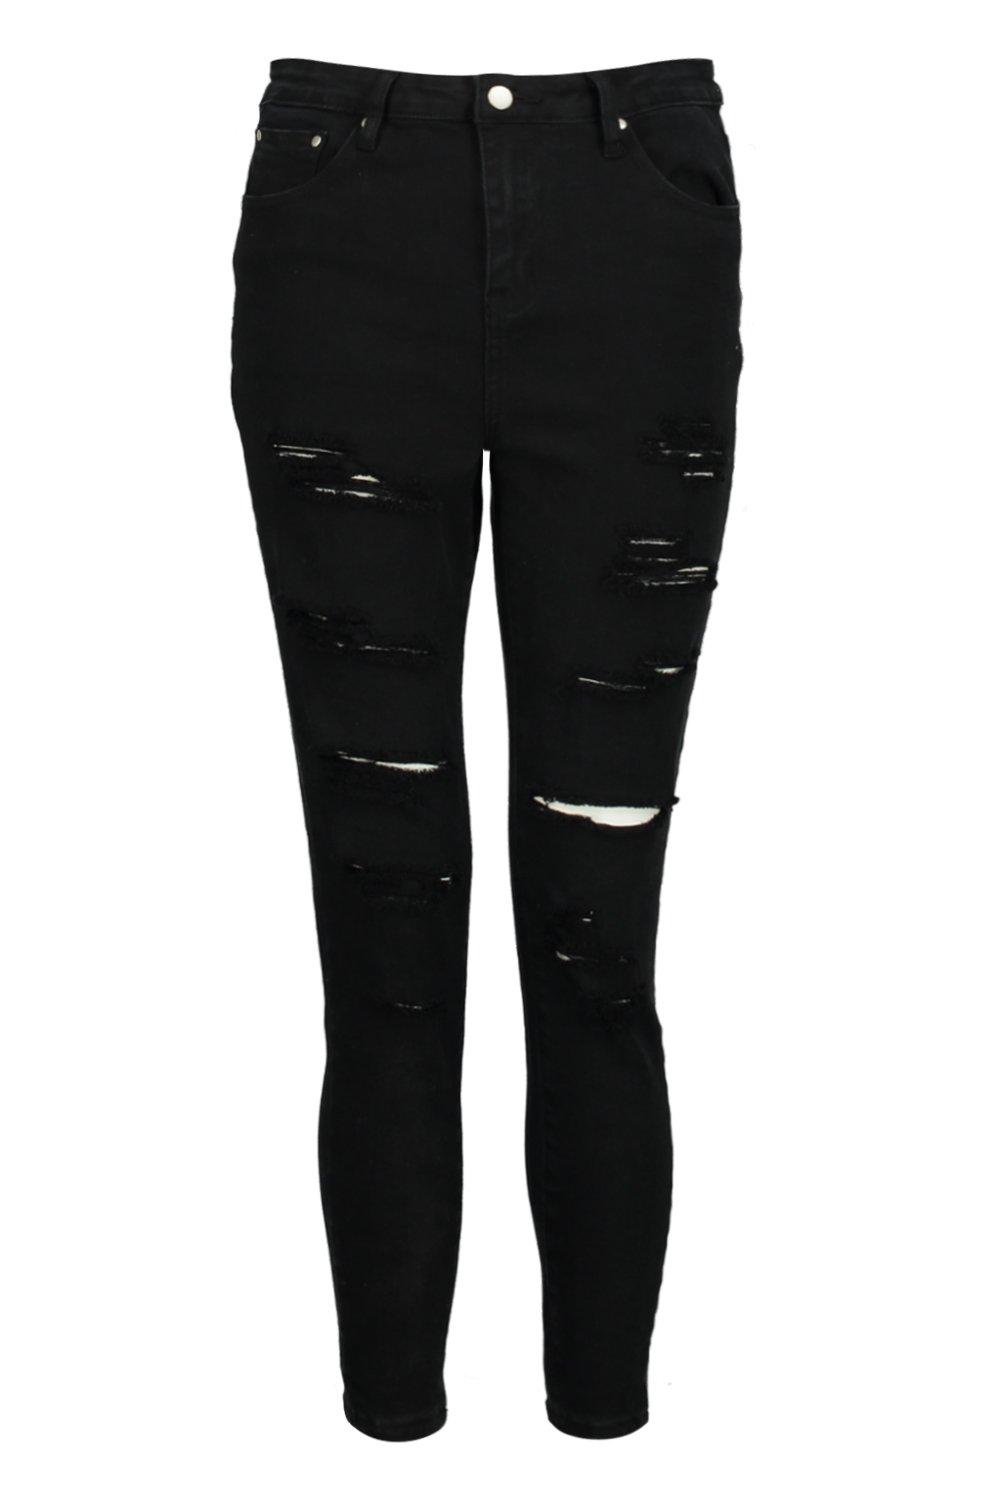 high waisted black ripped skinny jeans